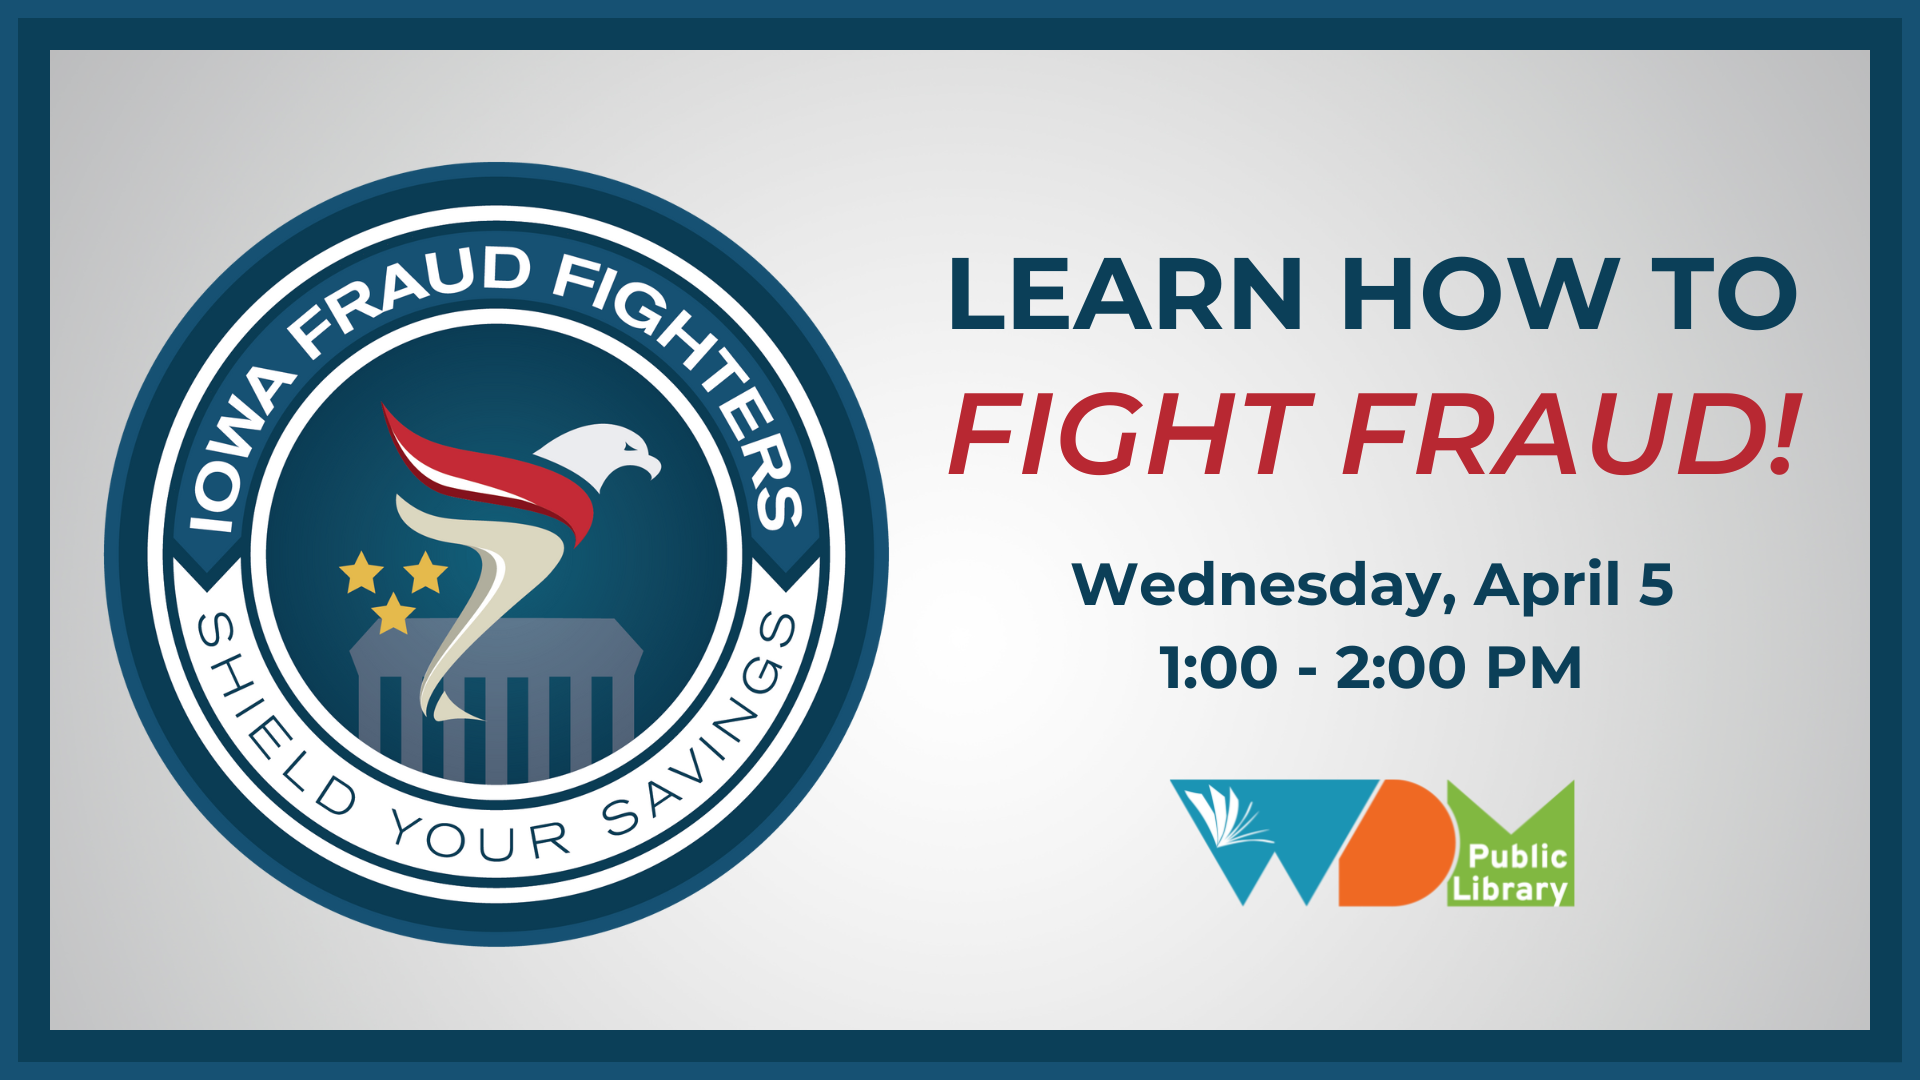 Logo for United Way Fraud Fighters/info with date/time of program